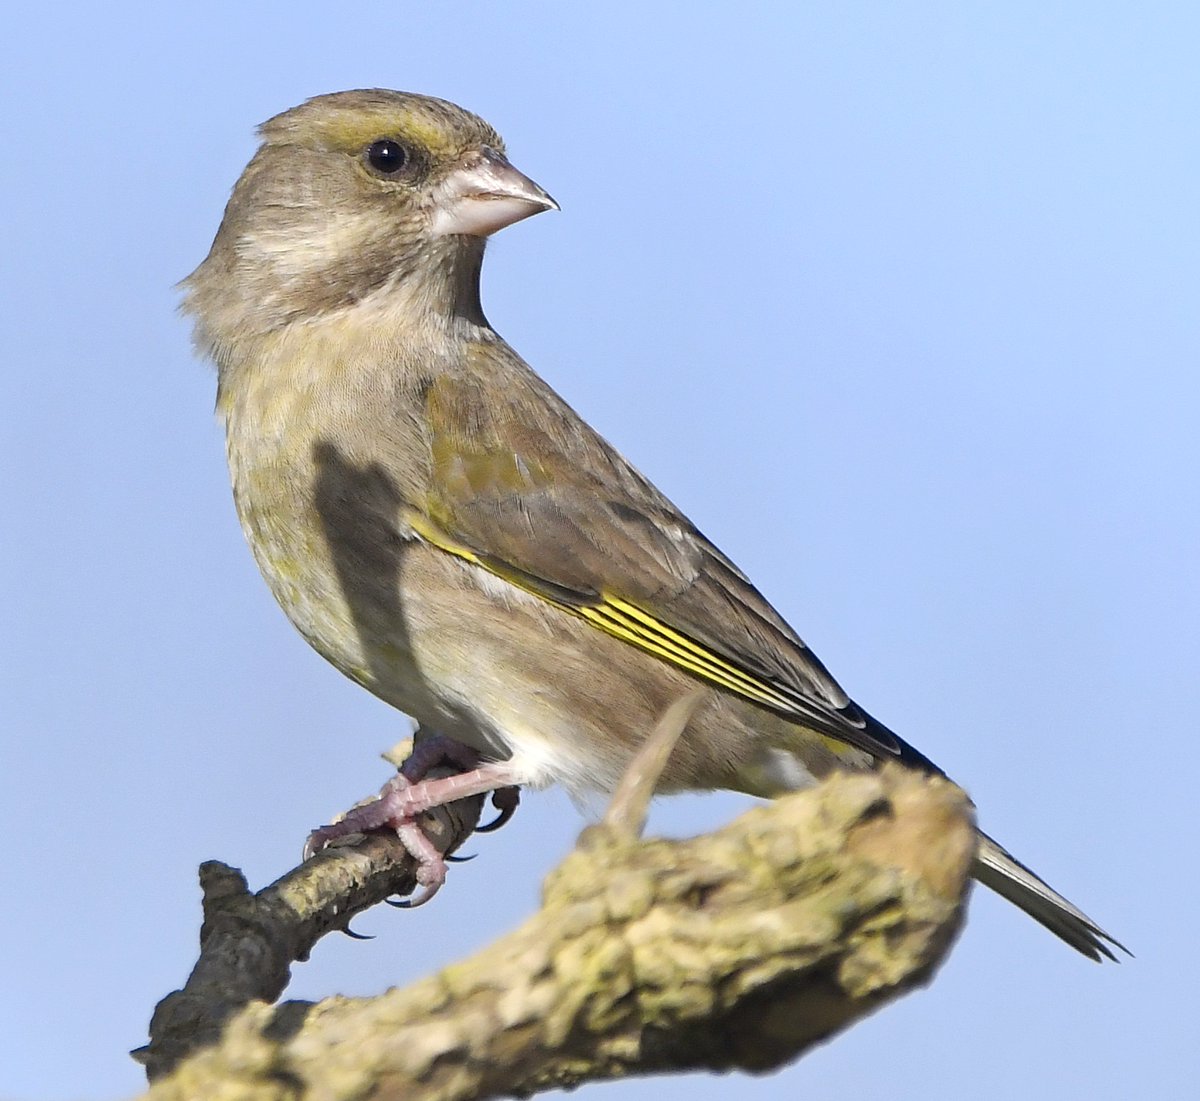 Greenfinch Previously common finch, a bad virus hit them badly, depleting their numbers. Numbers in some places seem to be slowly recovering.Males are a brighter green than the duller females.They love sunflower hearts! #SelfIsolationBirdWatch 